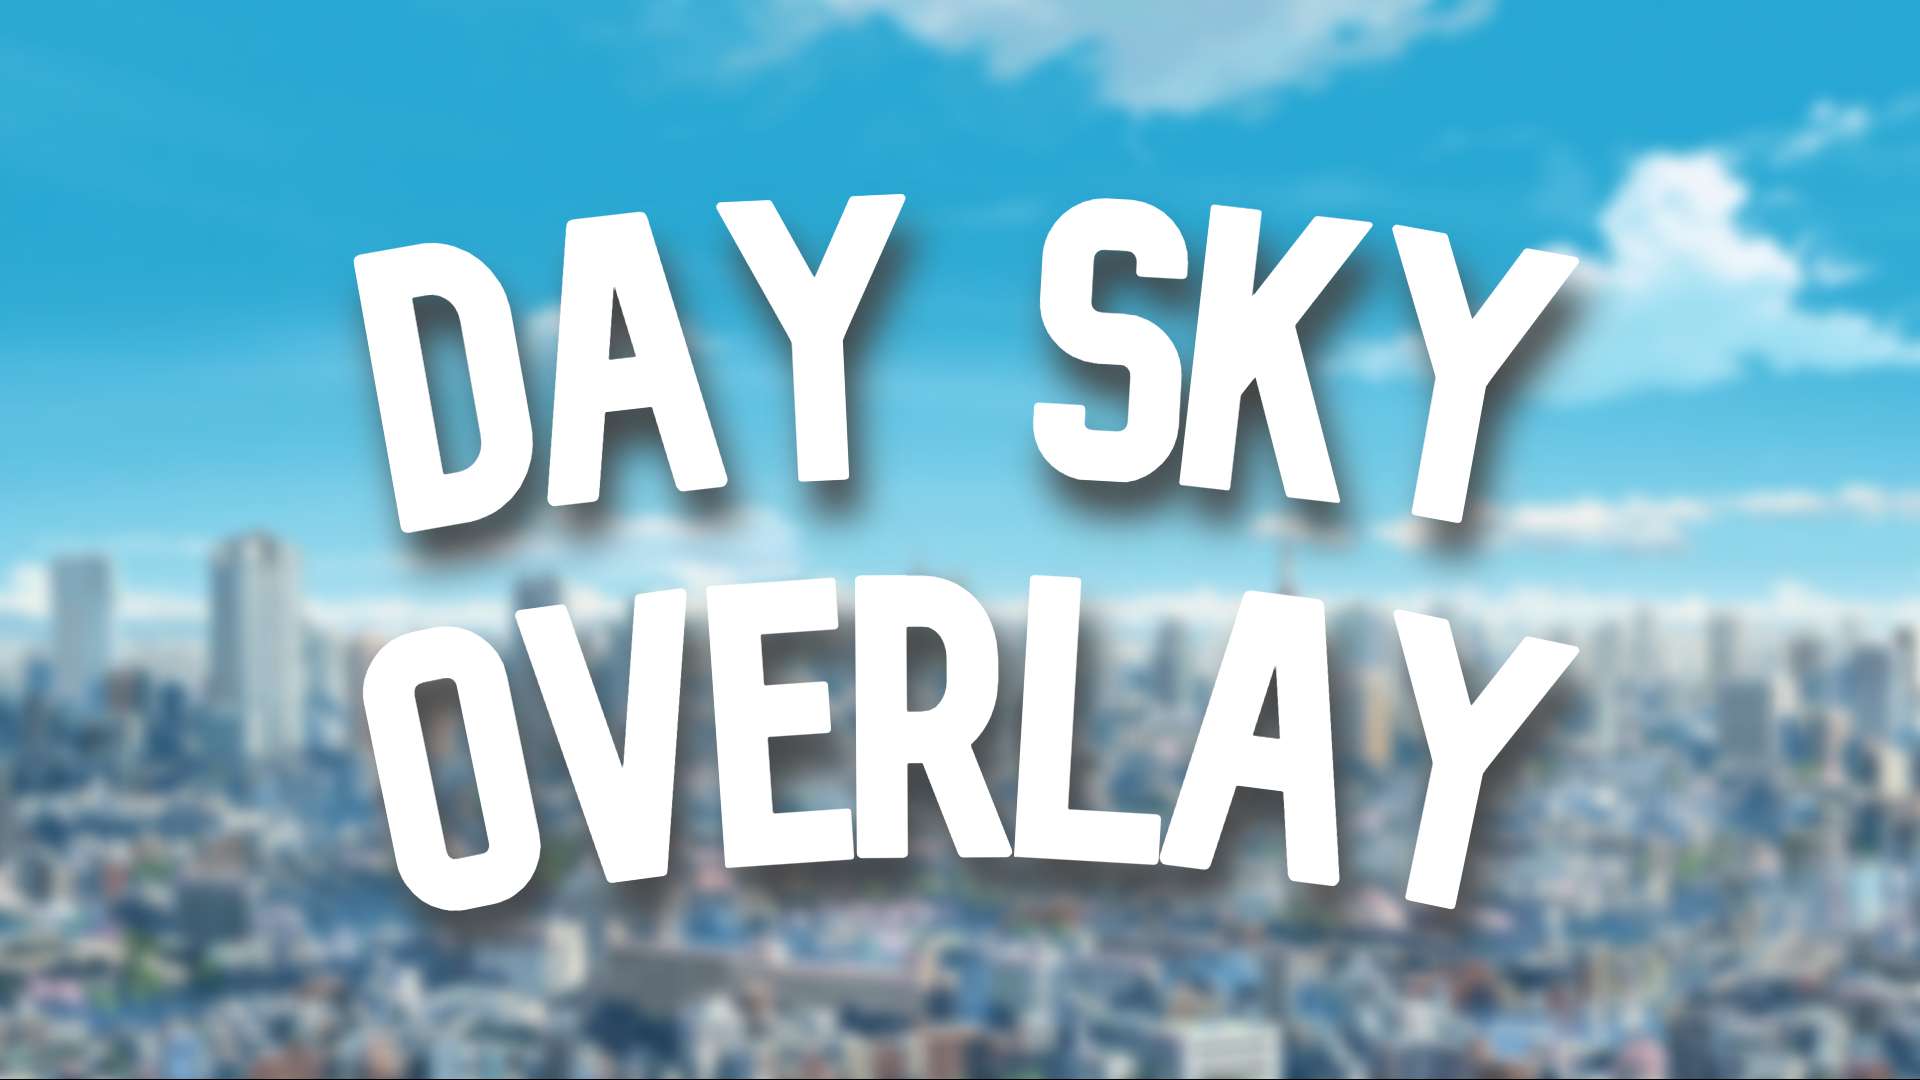 Day Sky Overlay #10 16 by rh56 on PvPRP